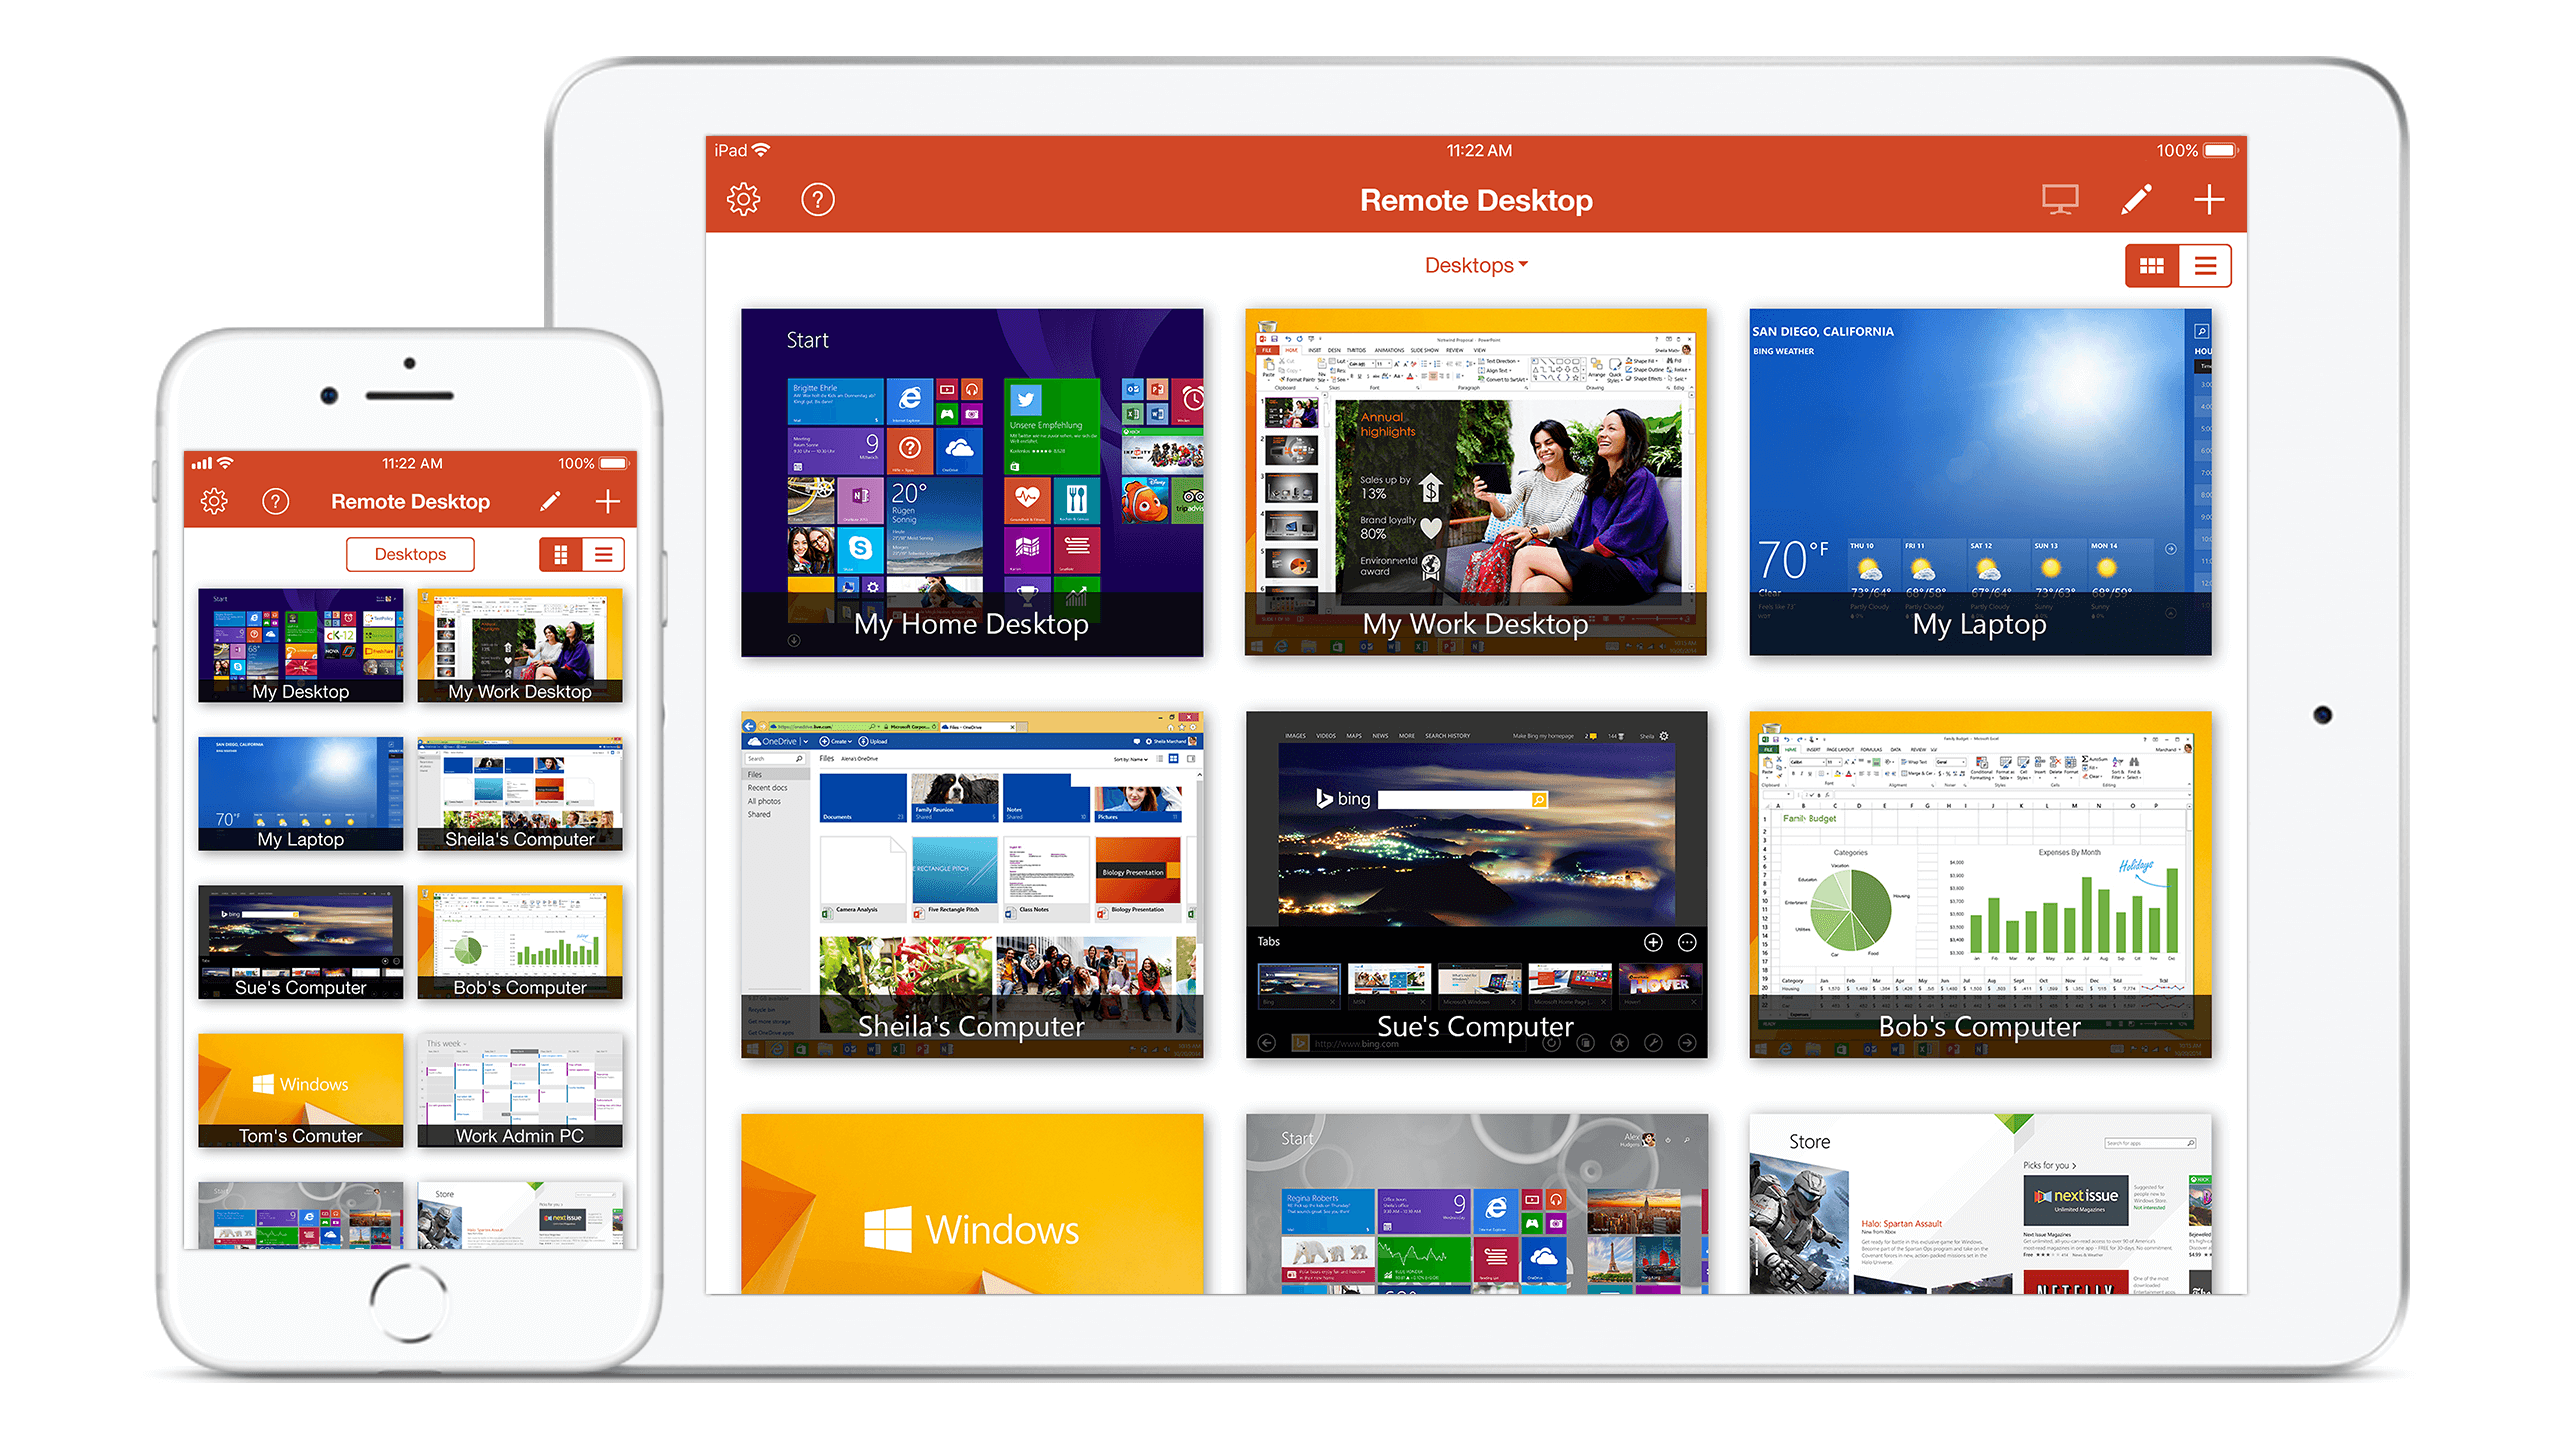 Microsoft Remote Desktop app for iOS shown on a iPhone and iPad by Courtney Comfort